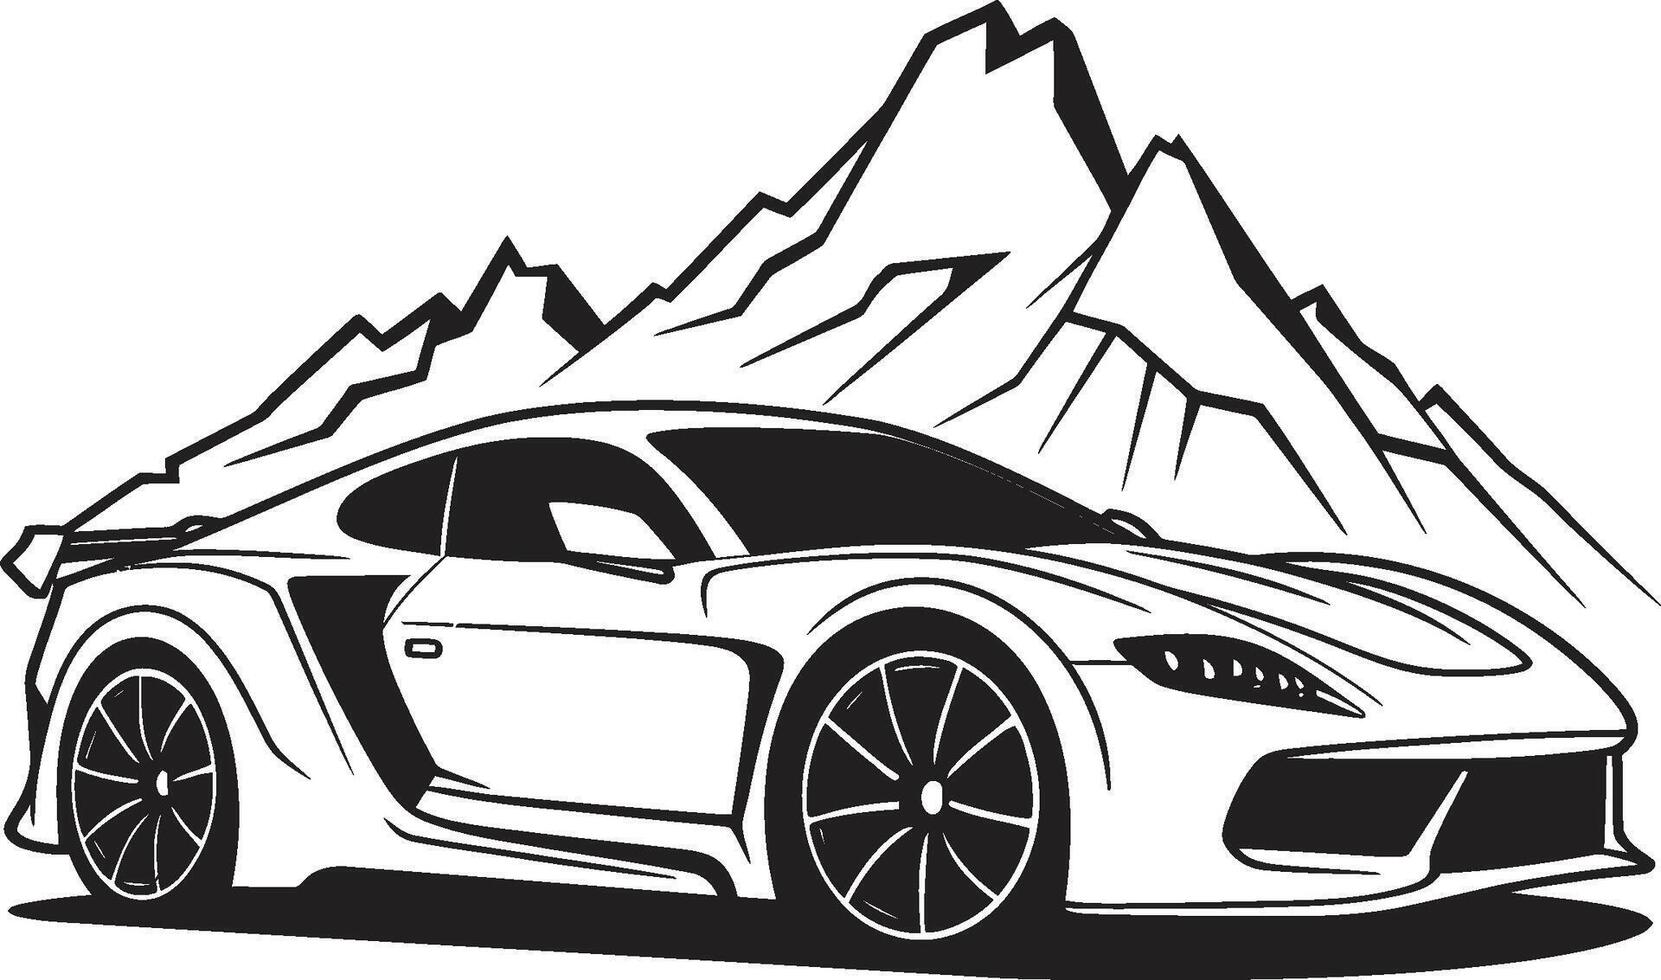 Highland Horizon Iconic Vector Symbol of a Sports Car Conquering Black Mountain Roads Summit Synchrony Black Logo Design with a Sports Car Icon in Harmony with Mountain Trails